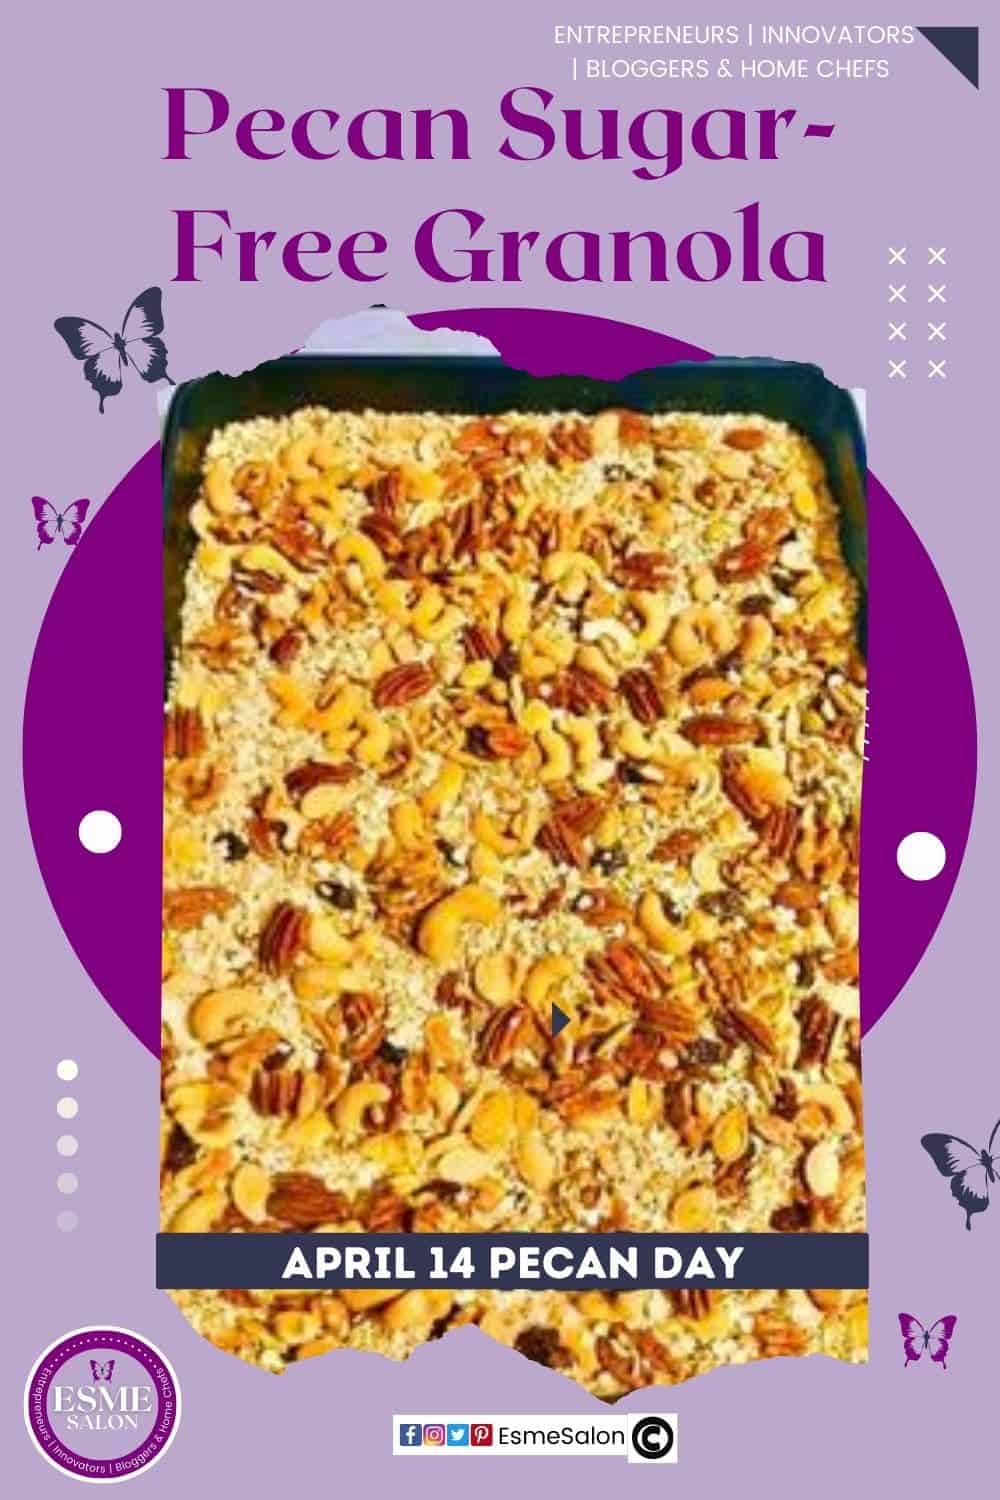 an image of a baking tray with Pecan Sugar-Free Granola